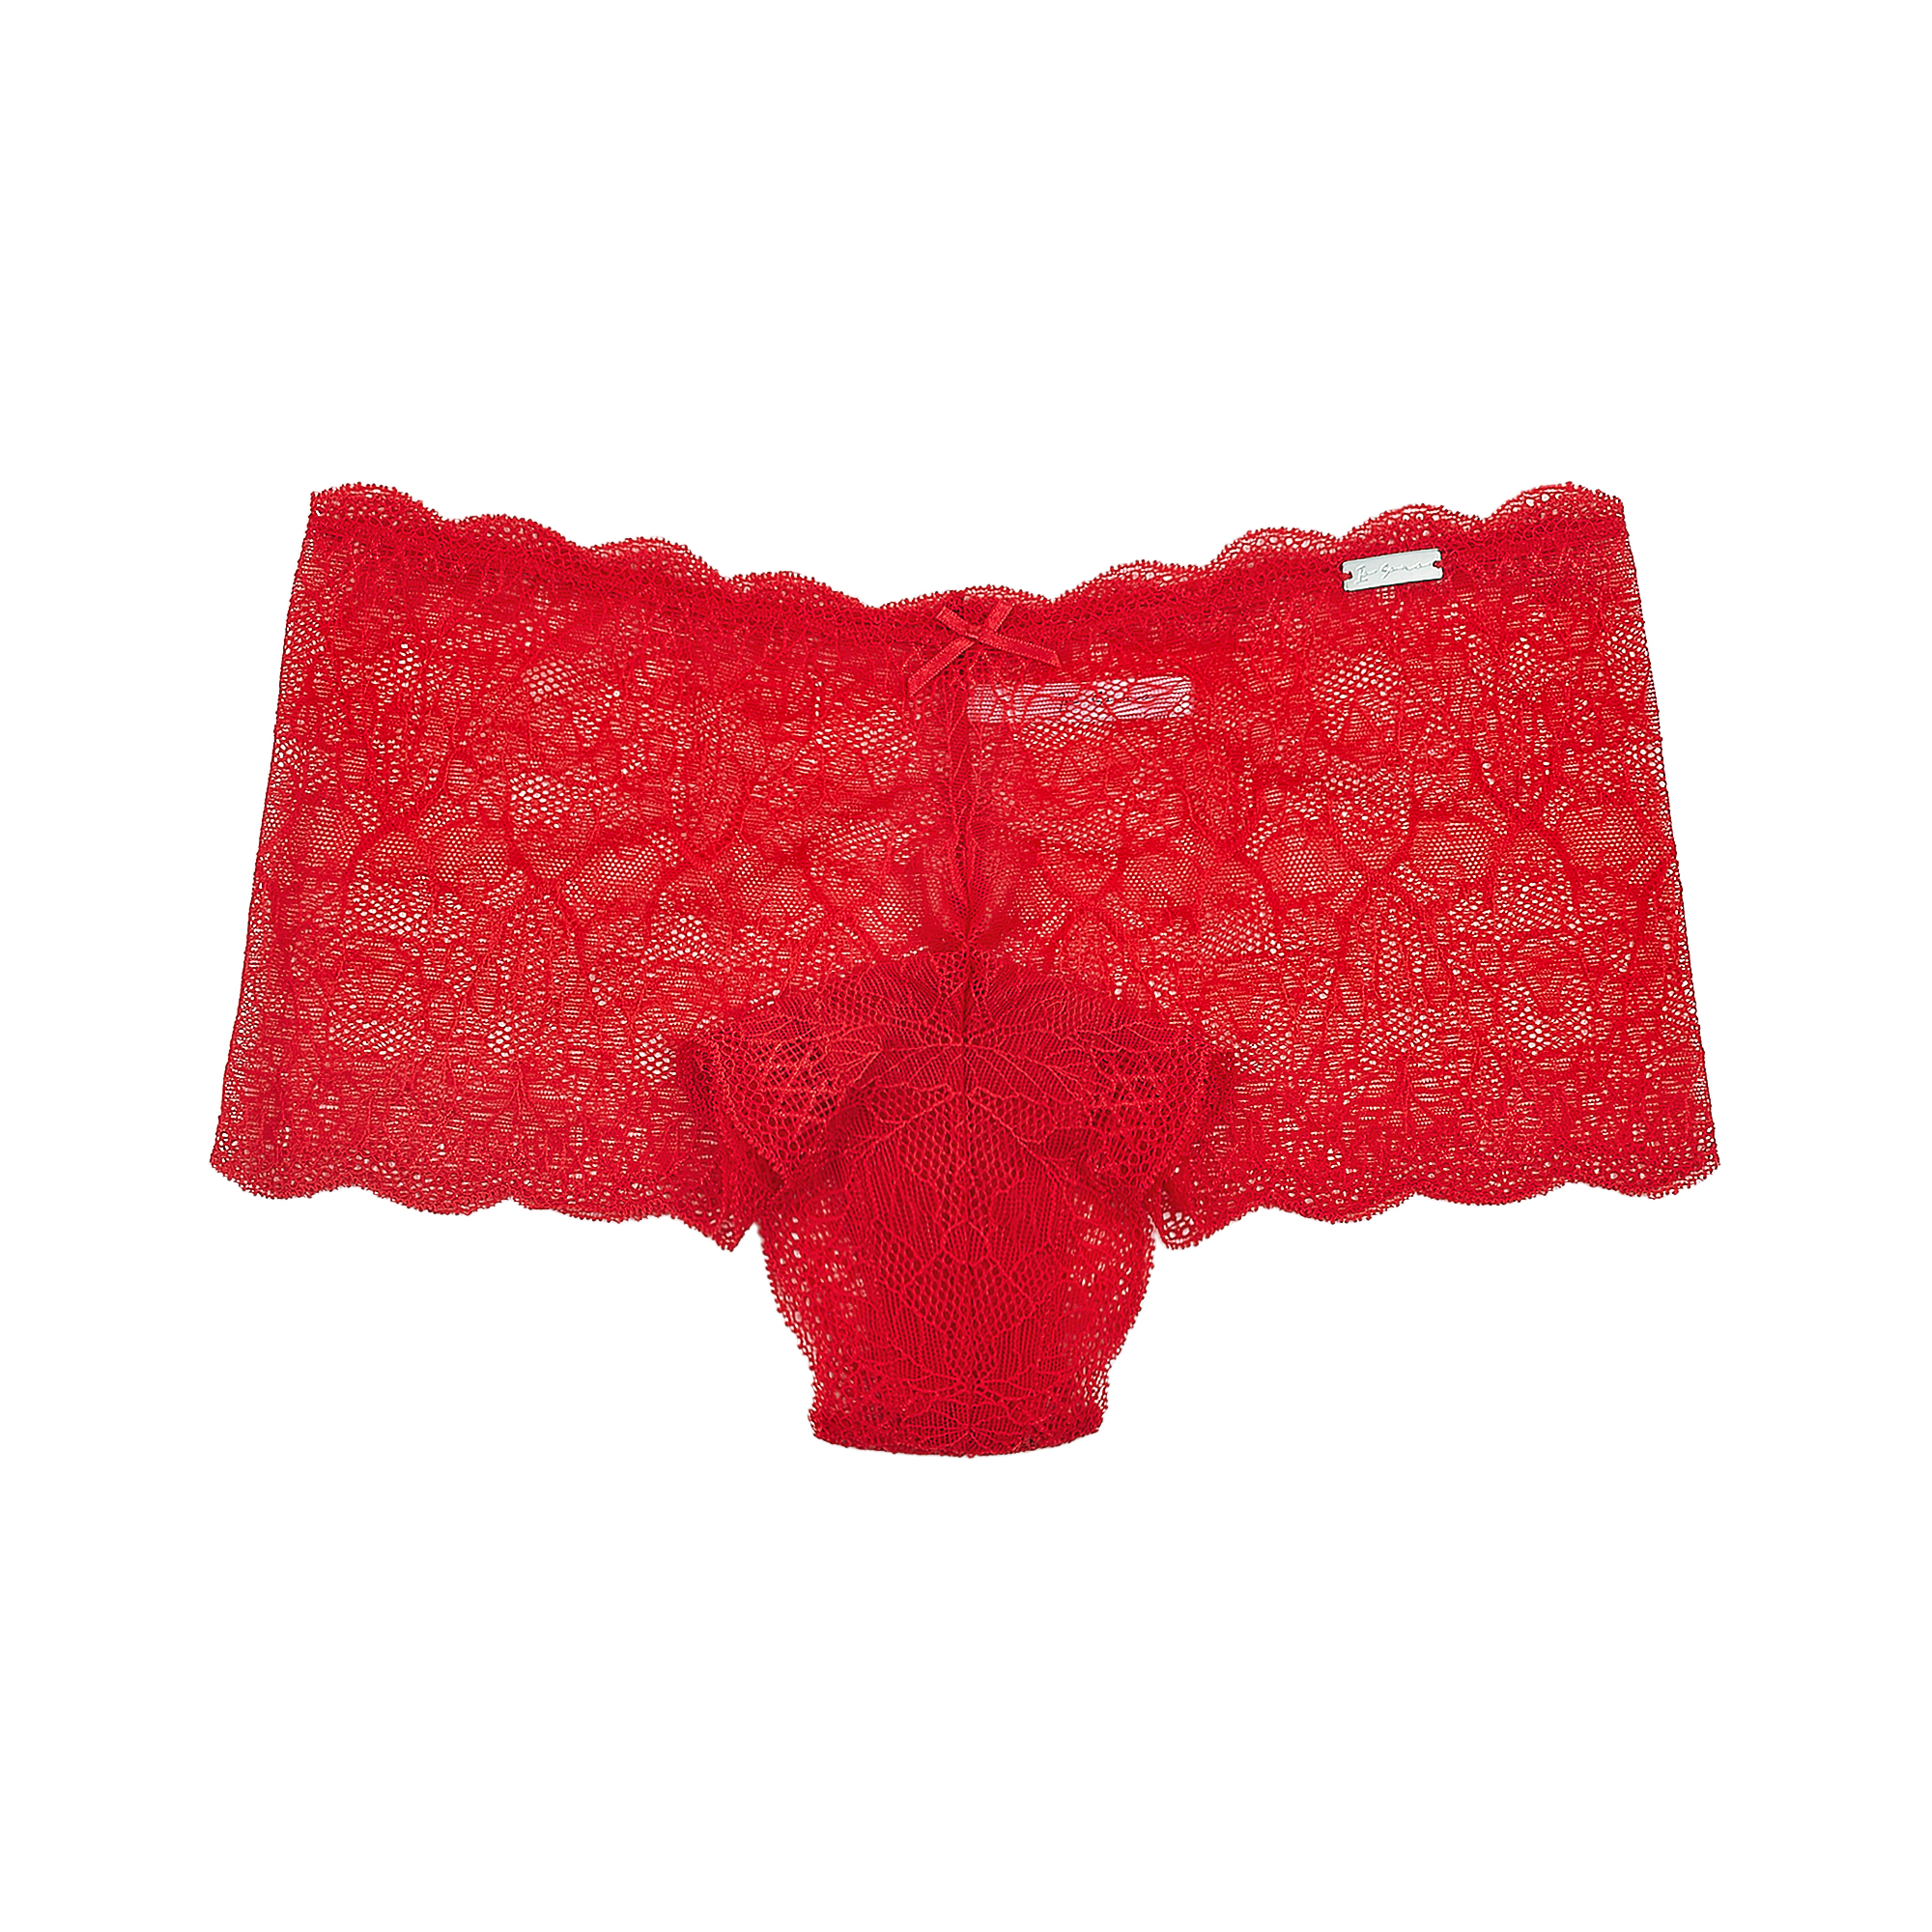 Roxie Cheeky Panty - Red